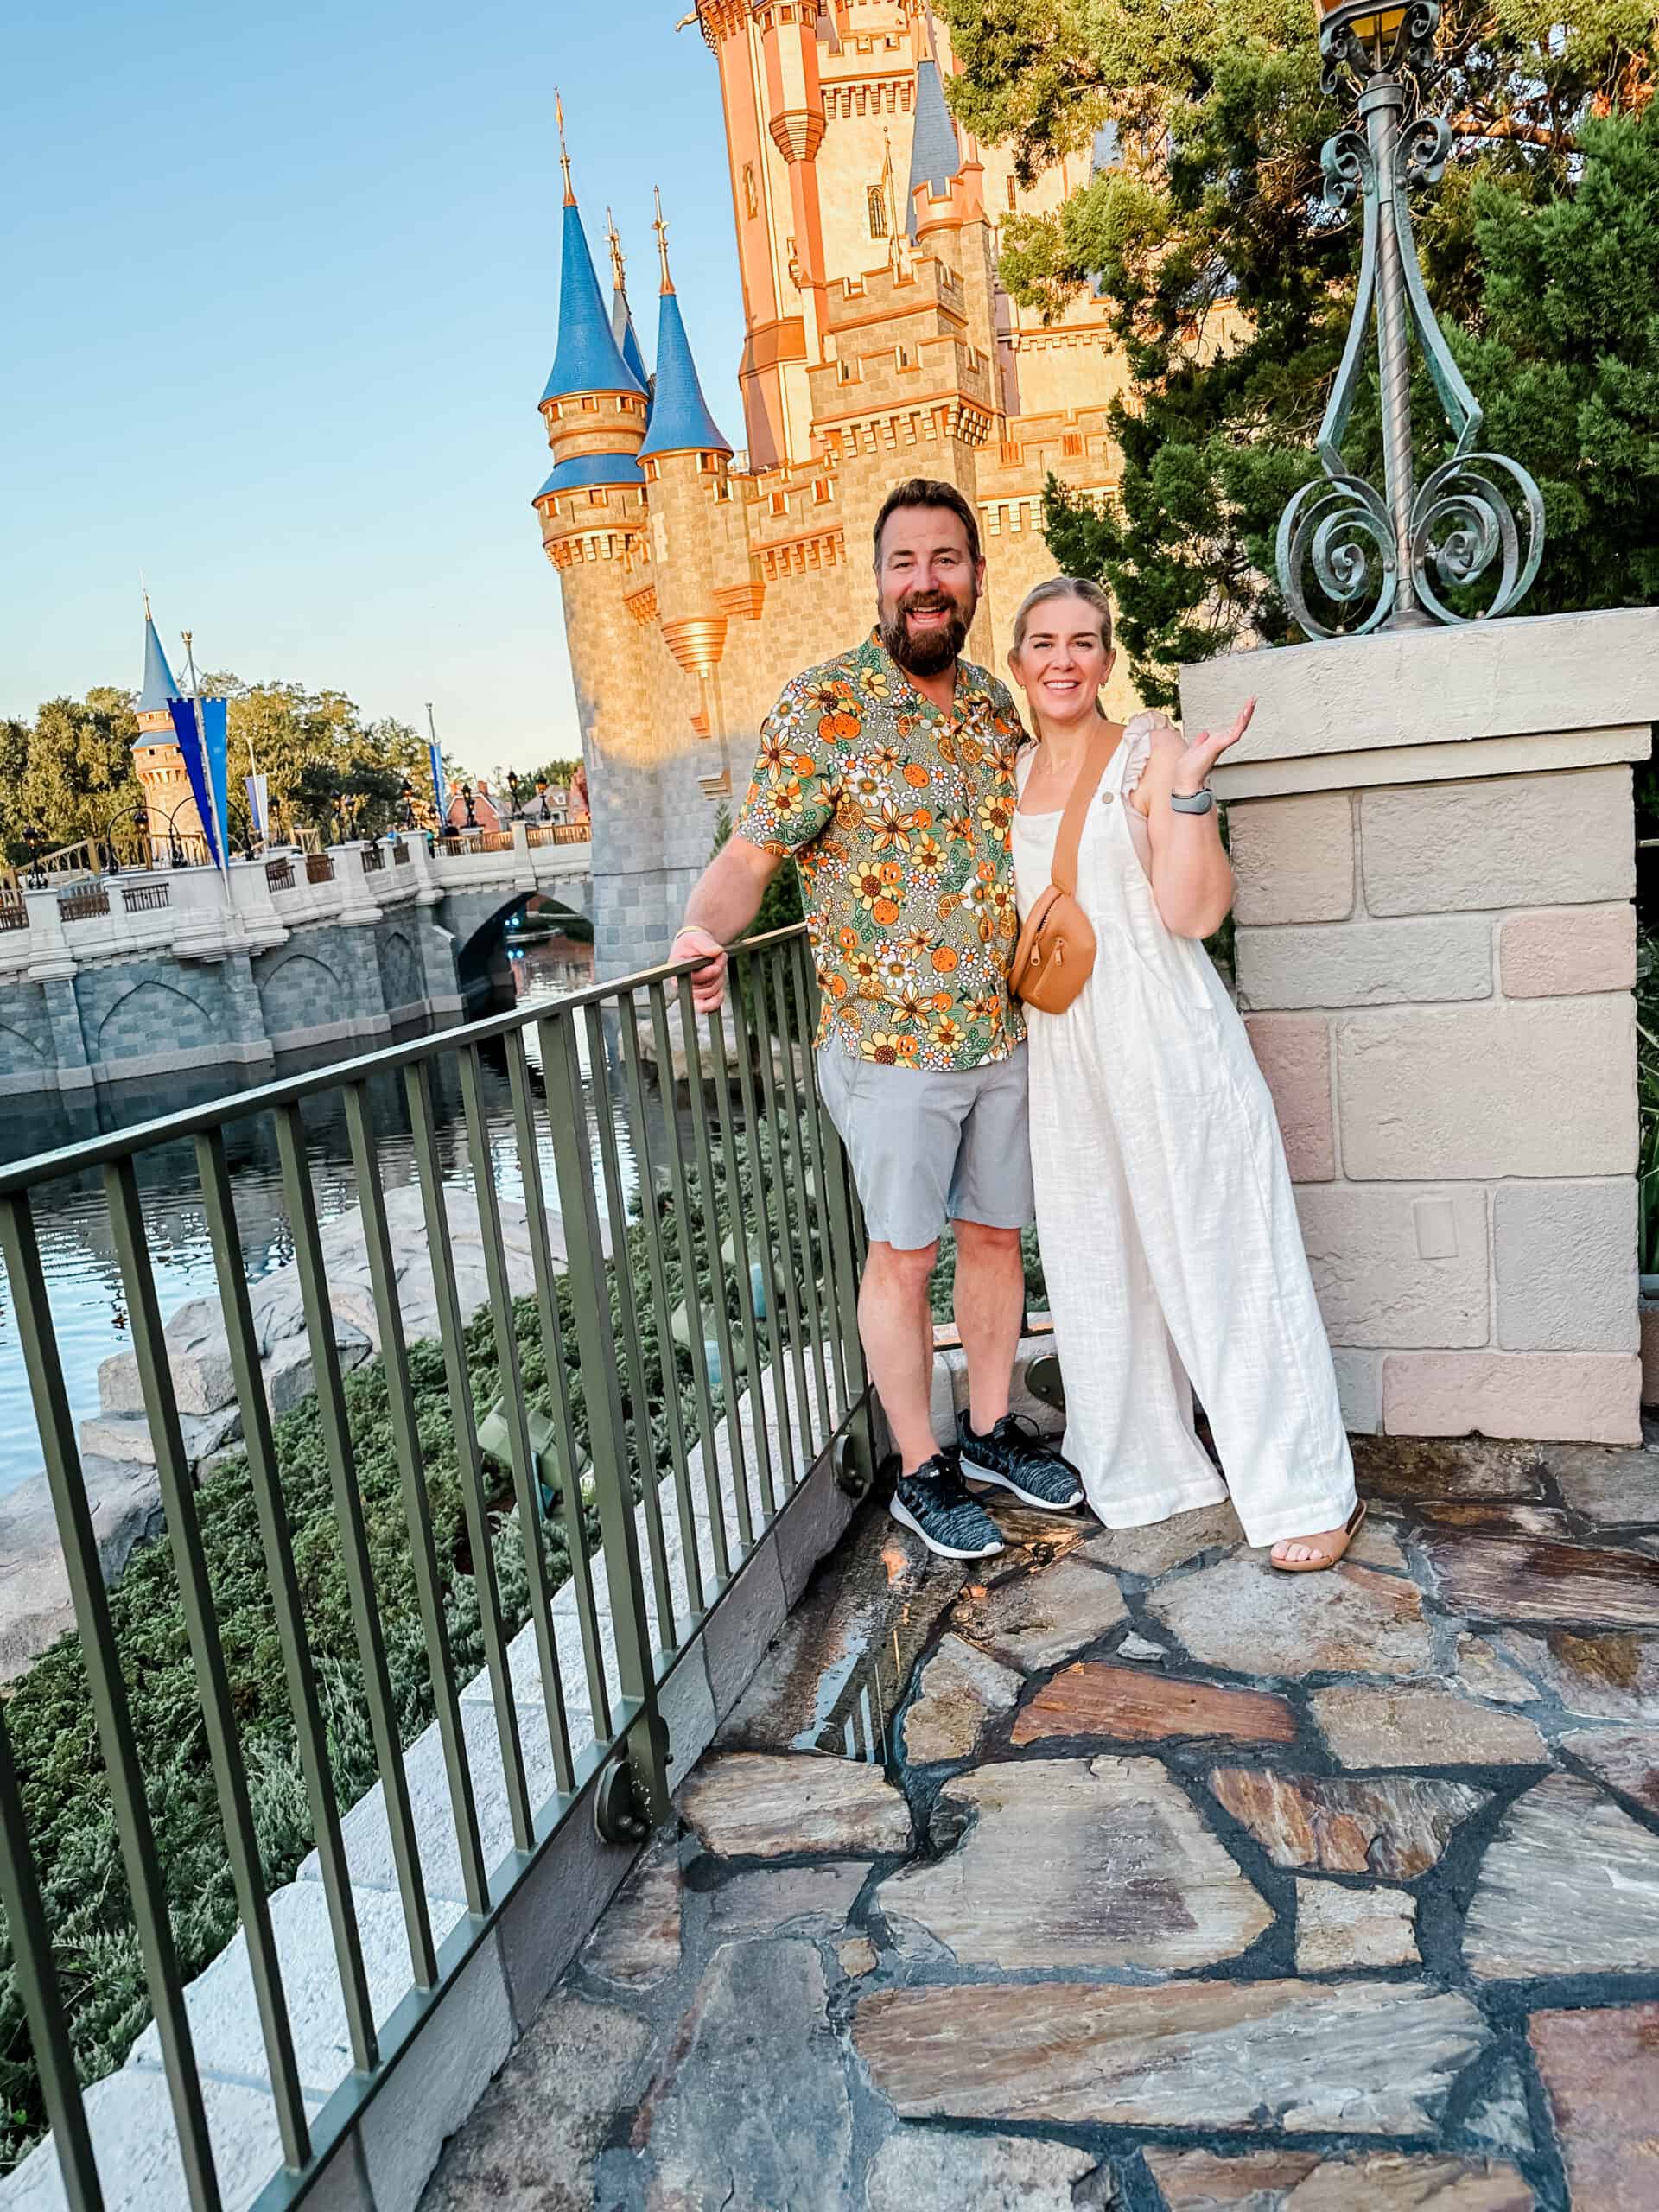 karin and Roger standing by disney castle